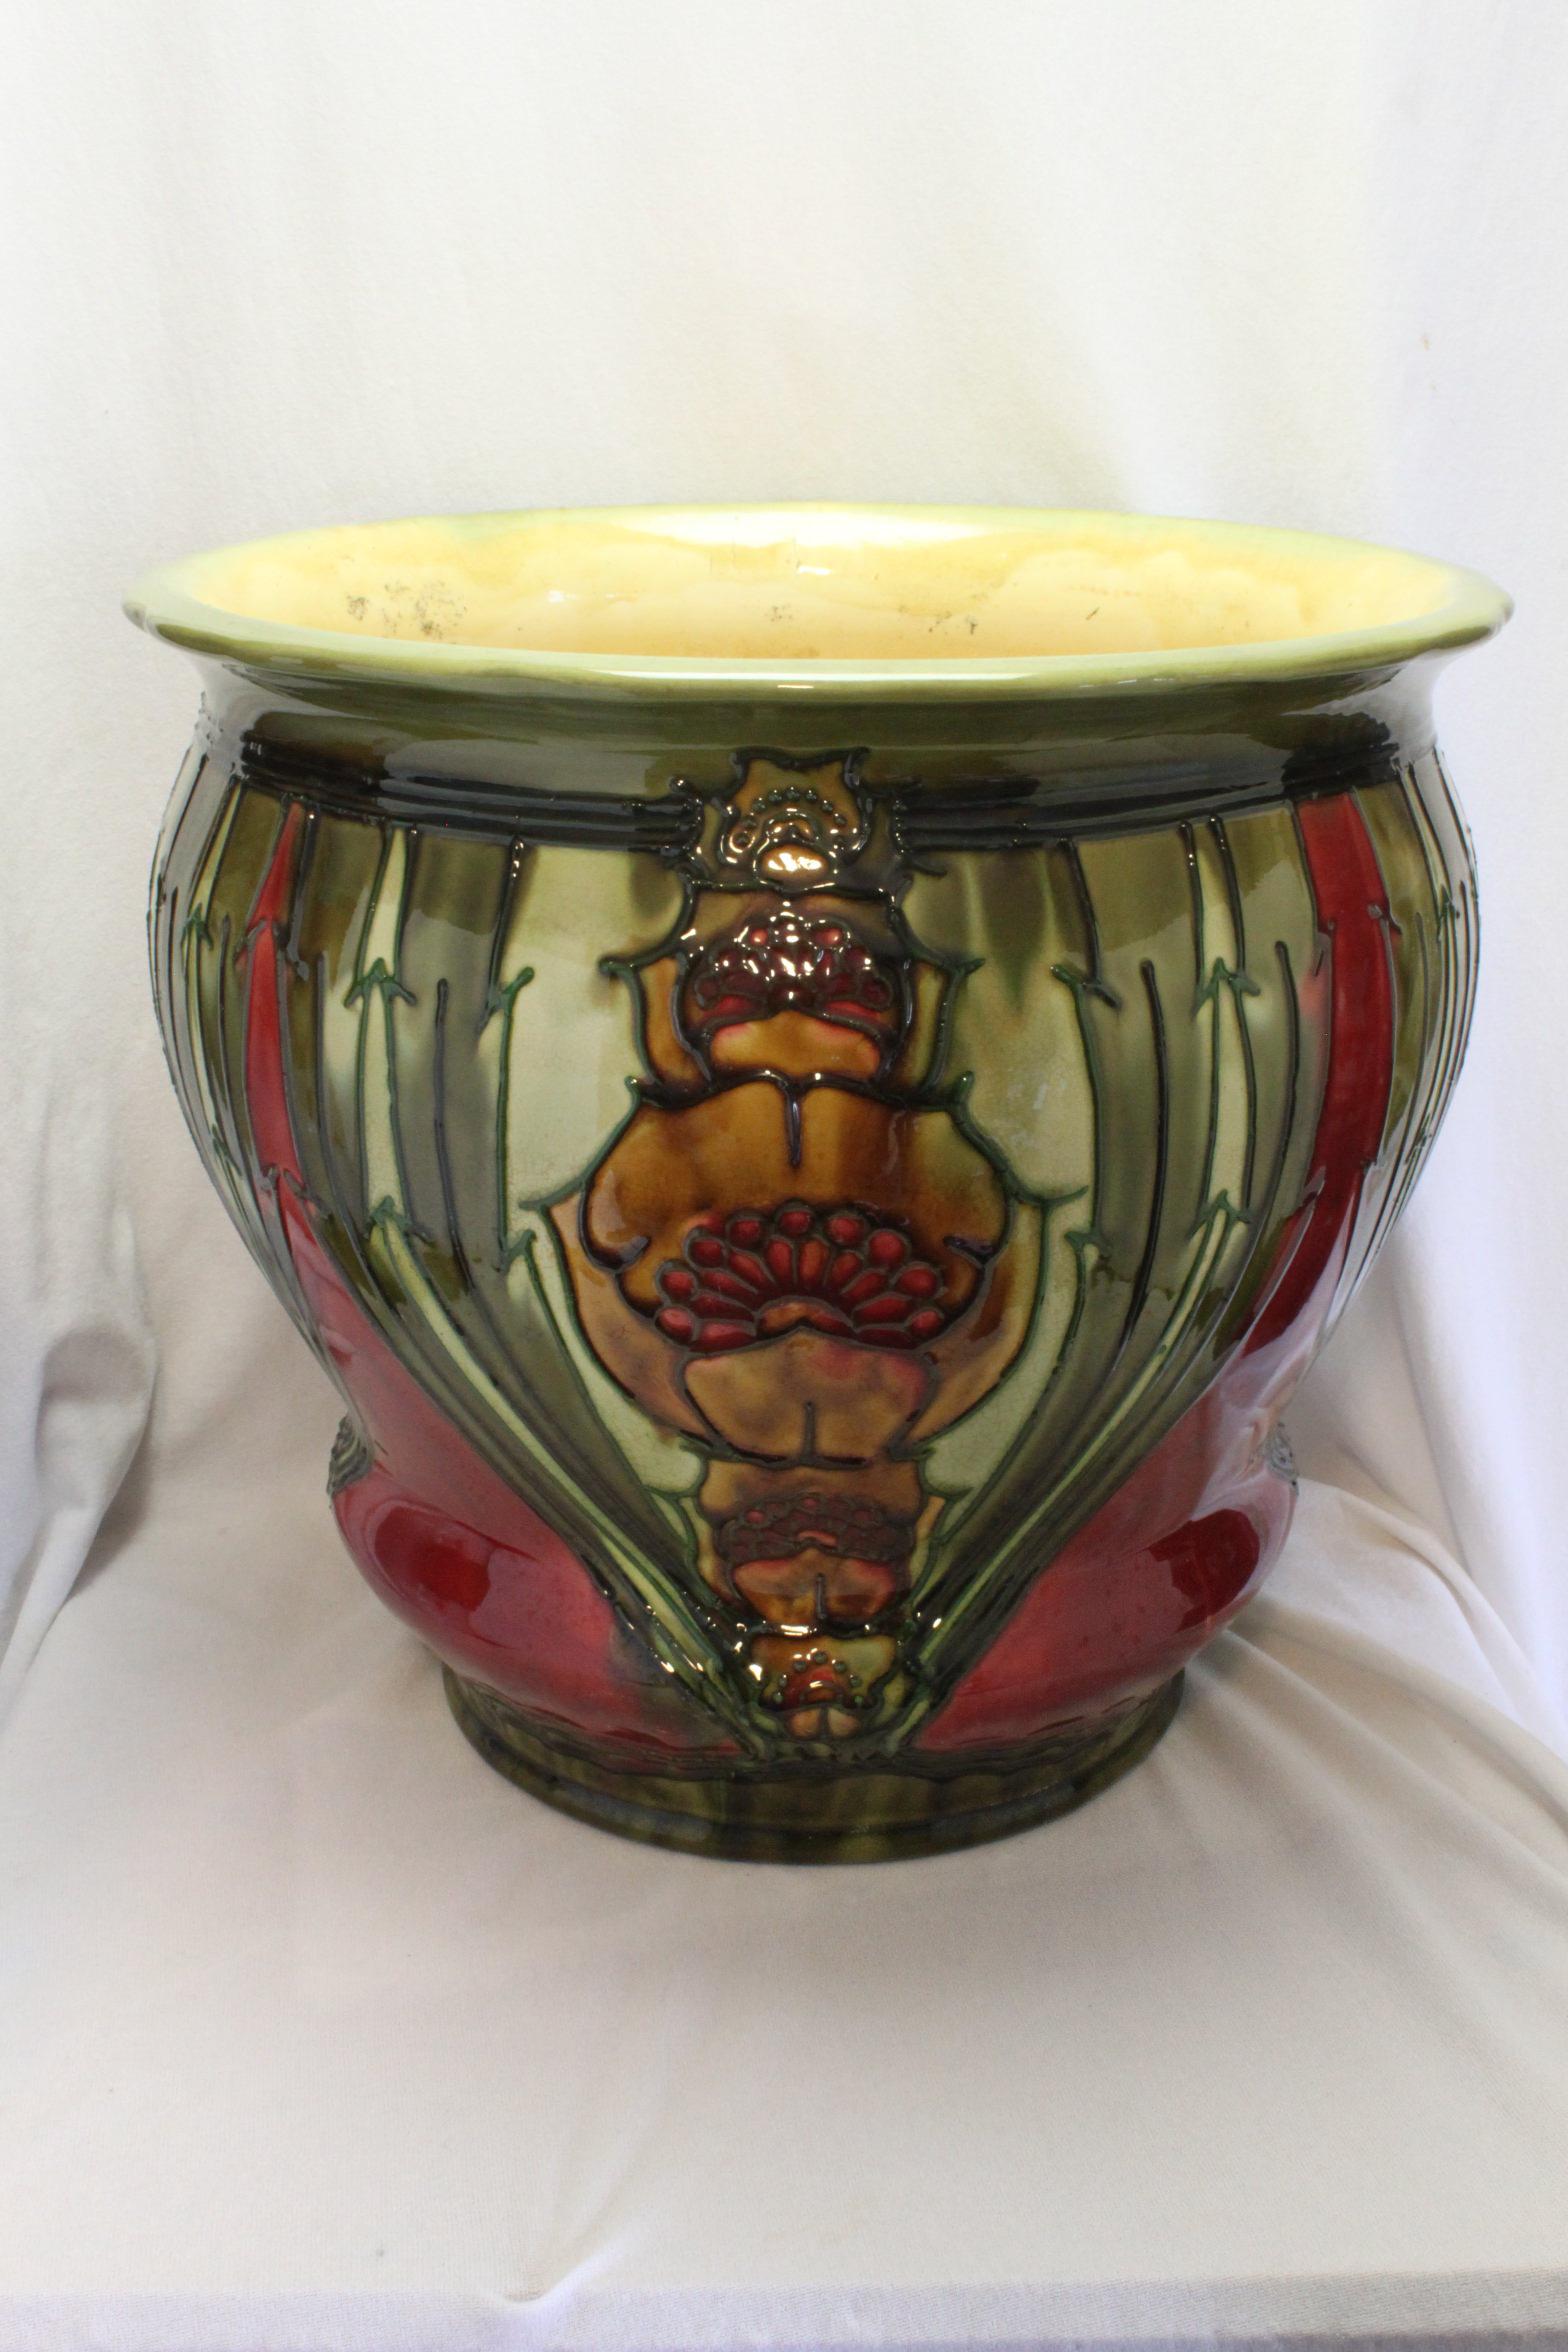 This Minton jardiniere is a lovely example of their 